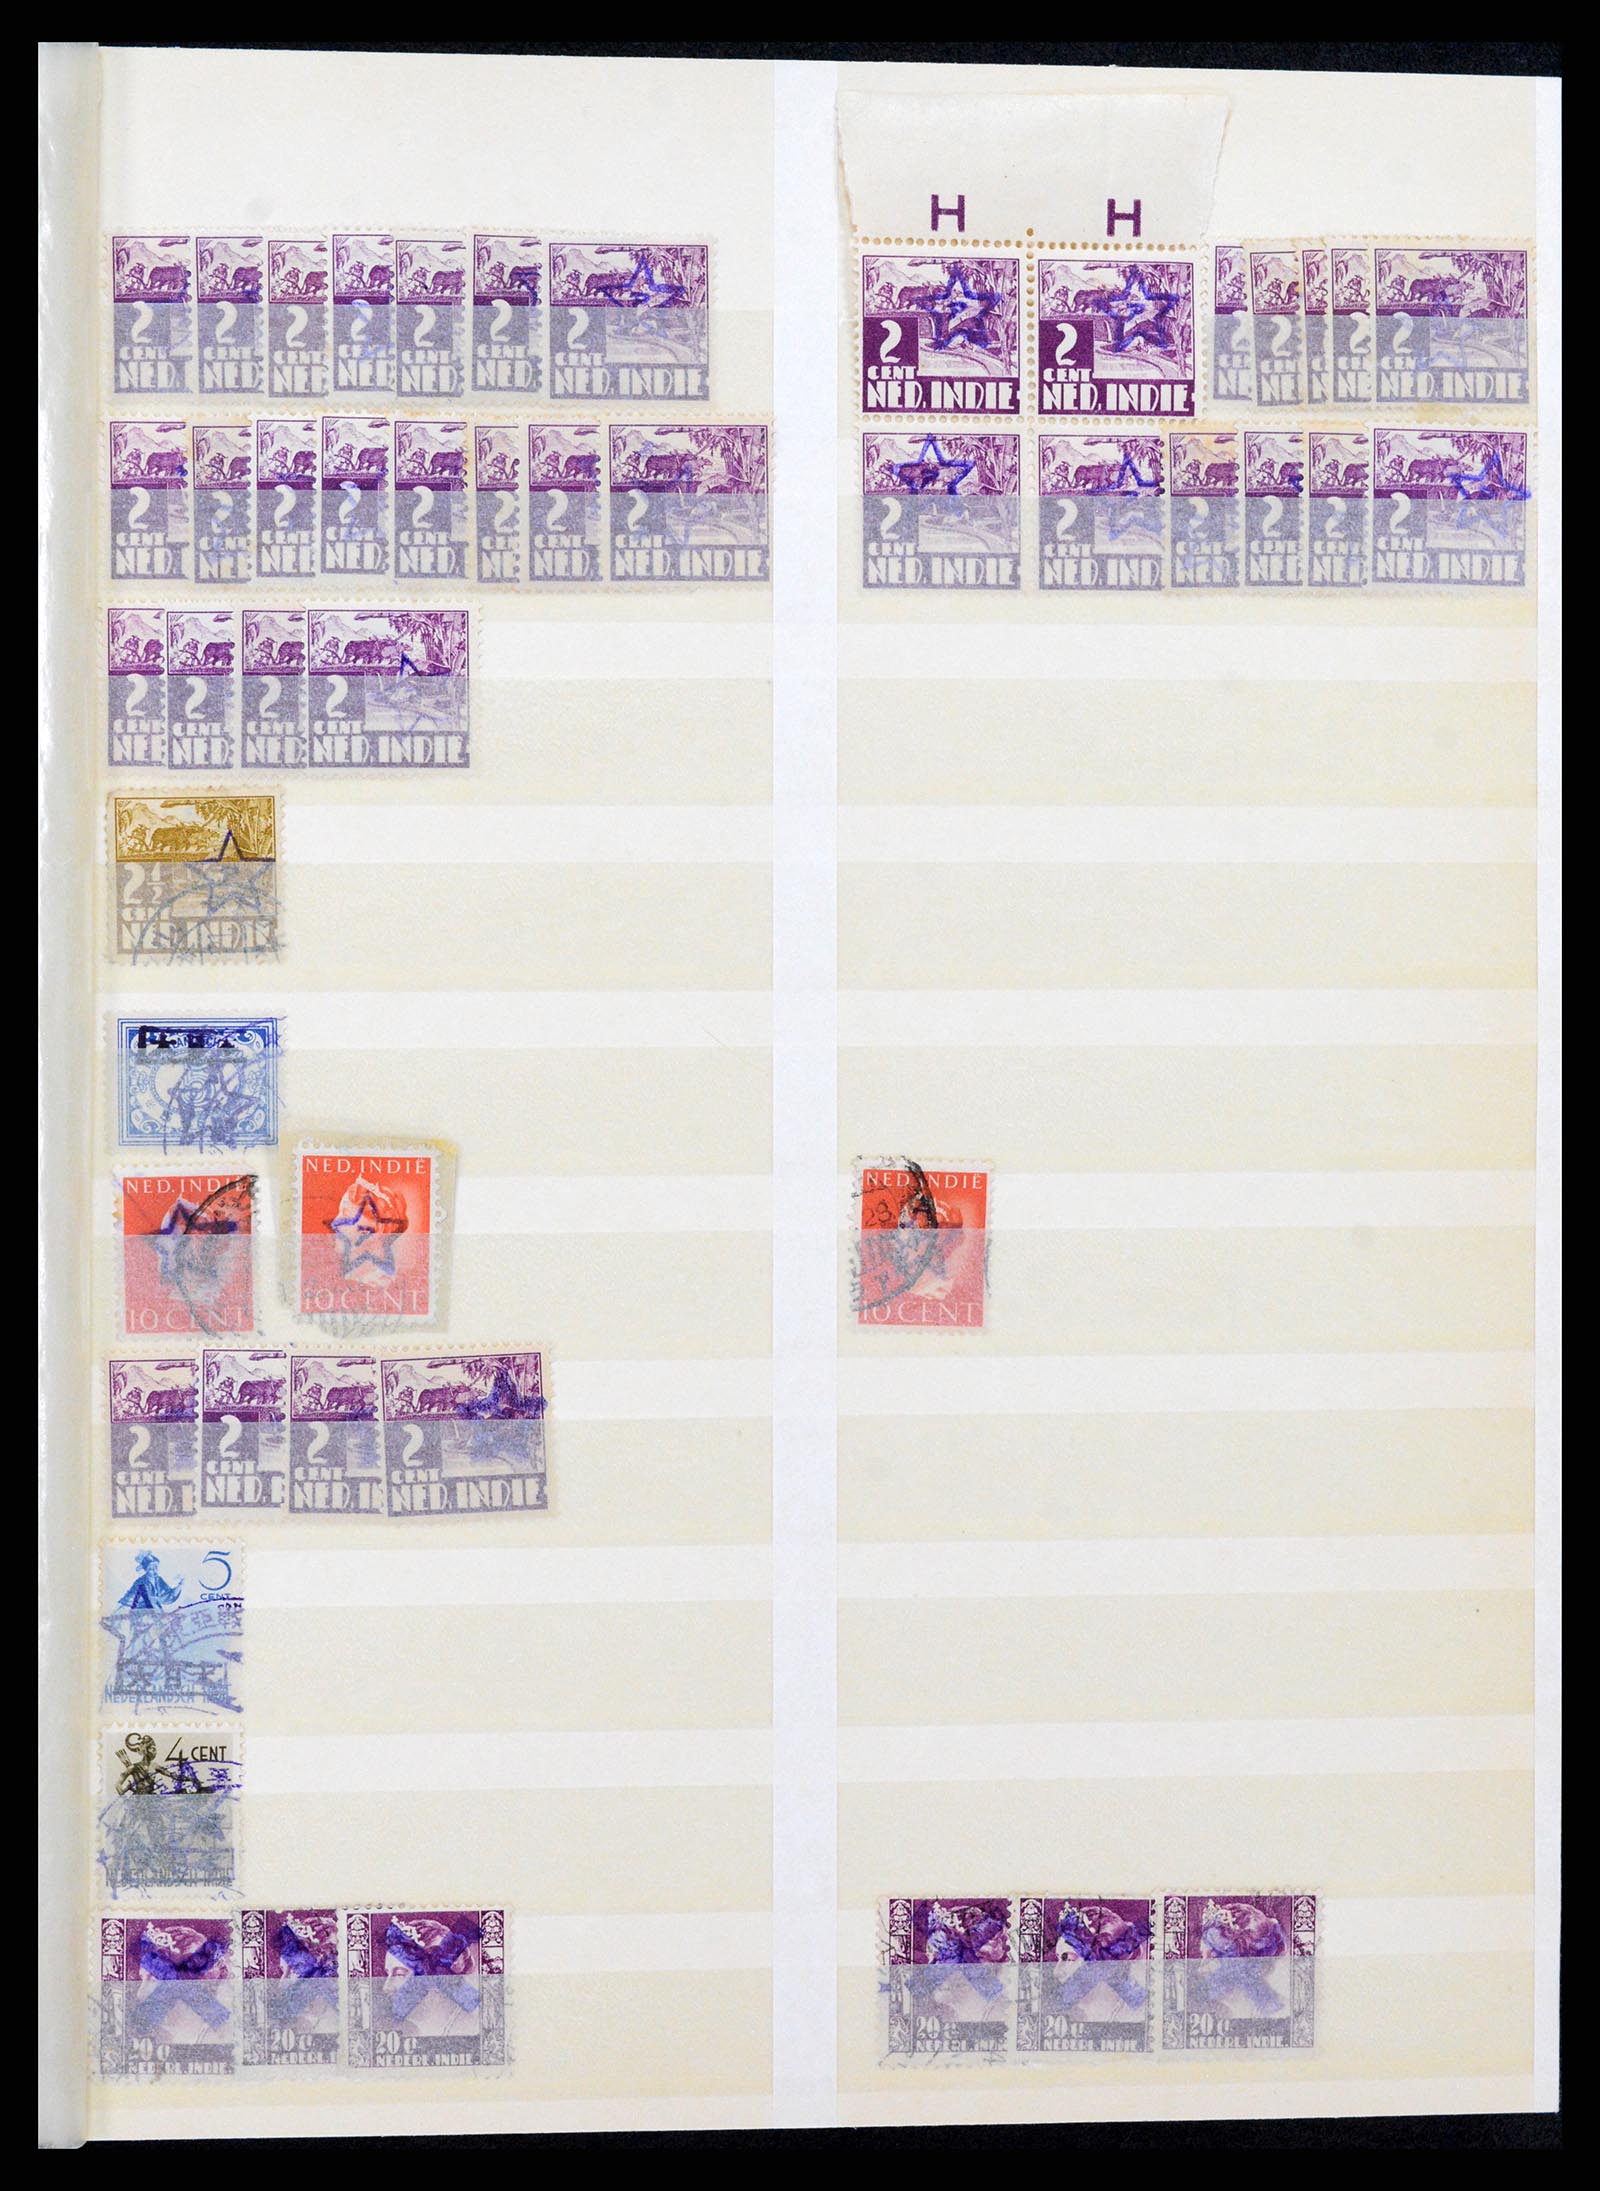 37429 001 - Stamp collection 37429 Japanese occupation Dutch East Indies 1942-1945.